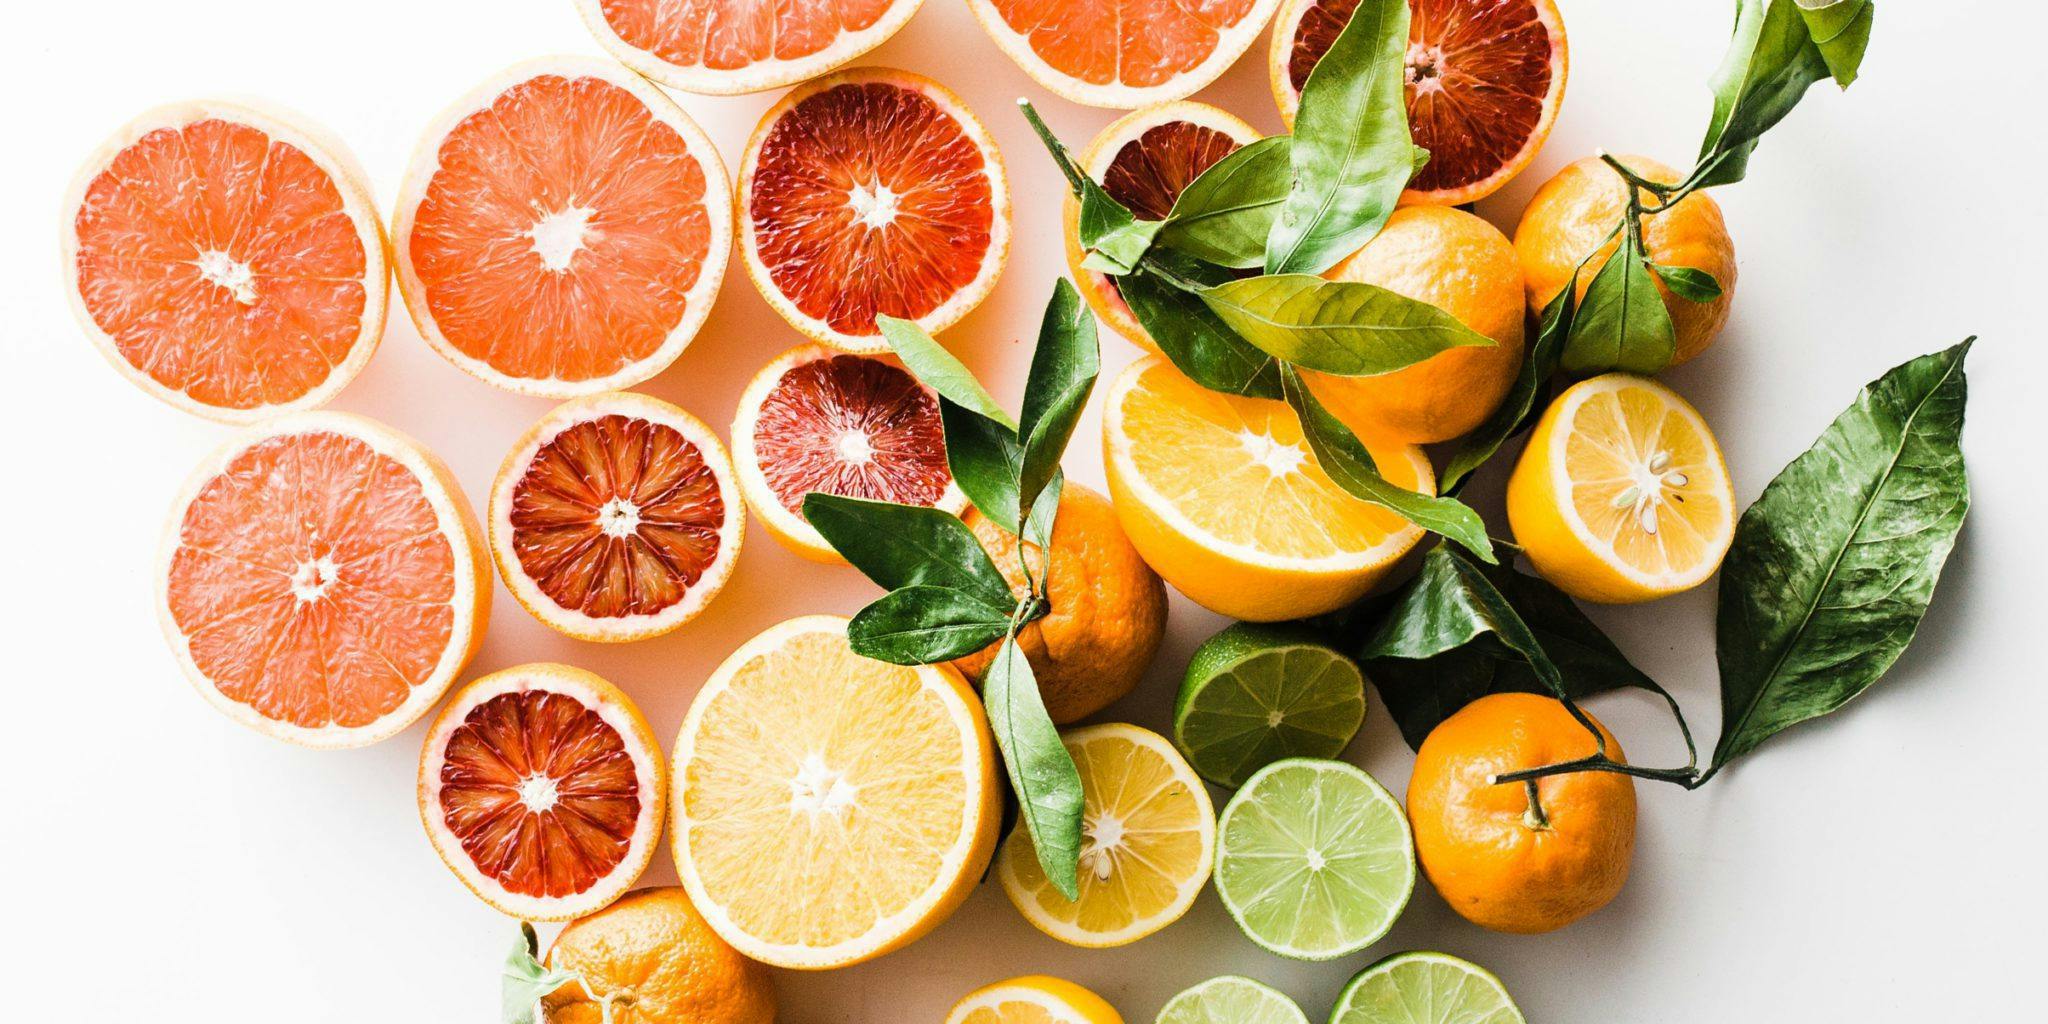 sliced oranges and leaves on a white background